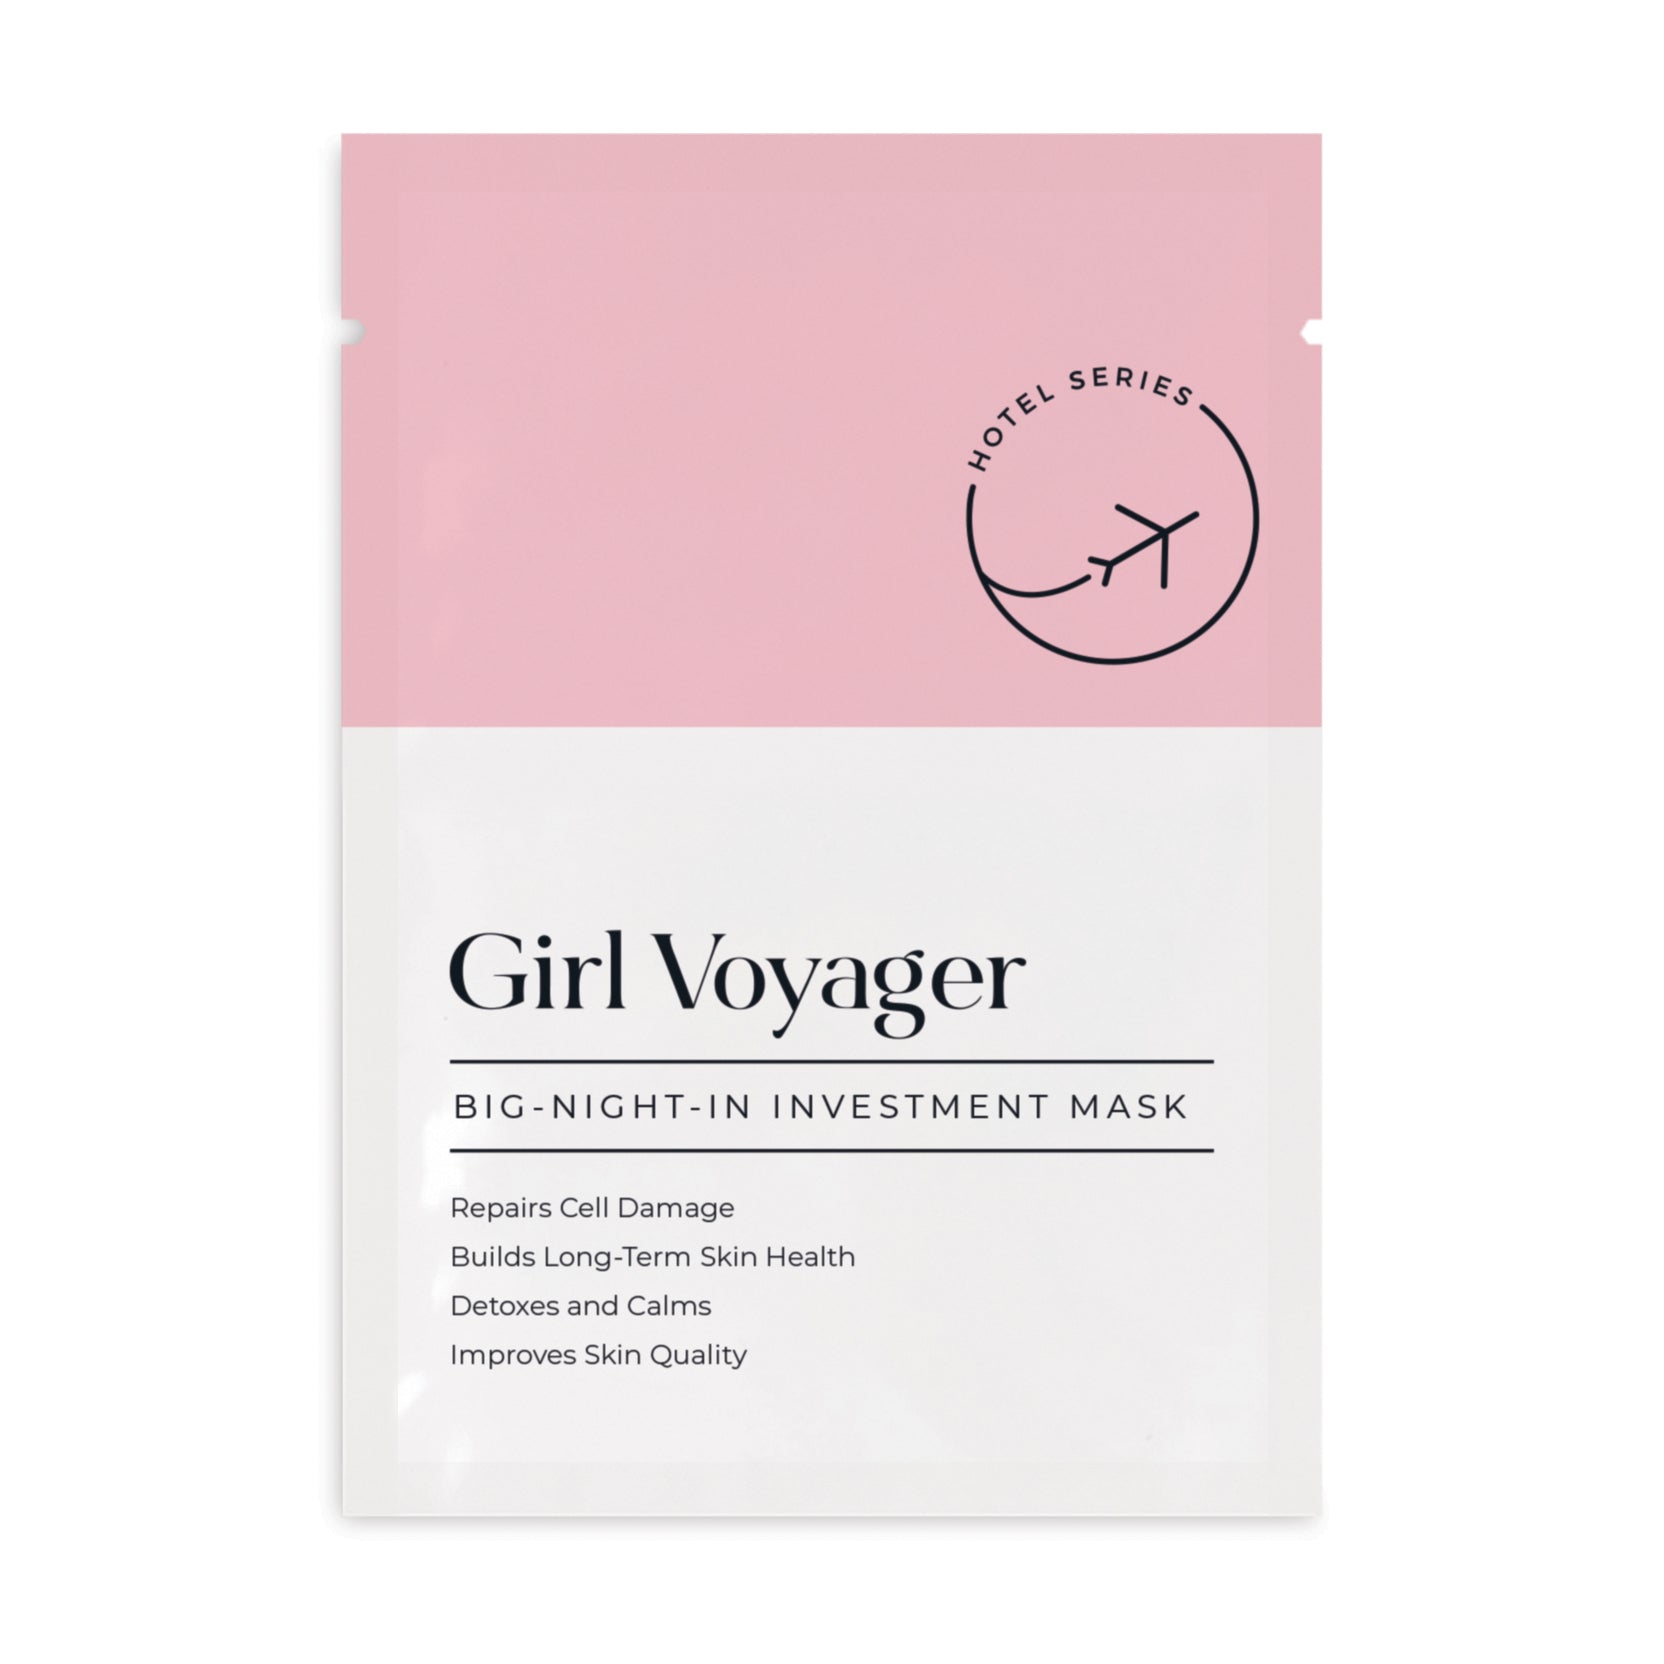 Big Night In Investment Mask Hotel Room Survival Series Girl Voyager Plumping Hydrating Mask